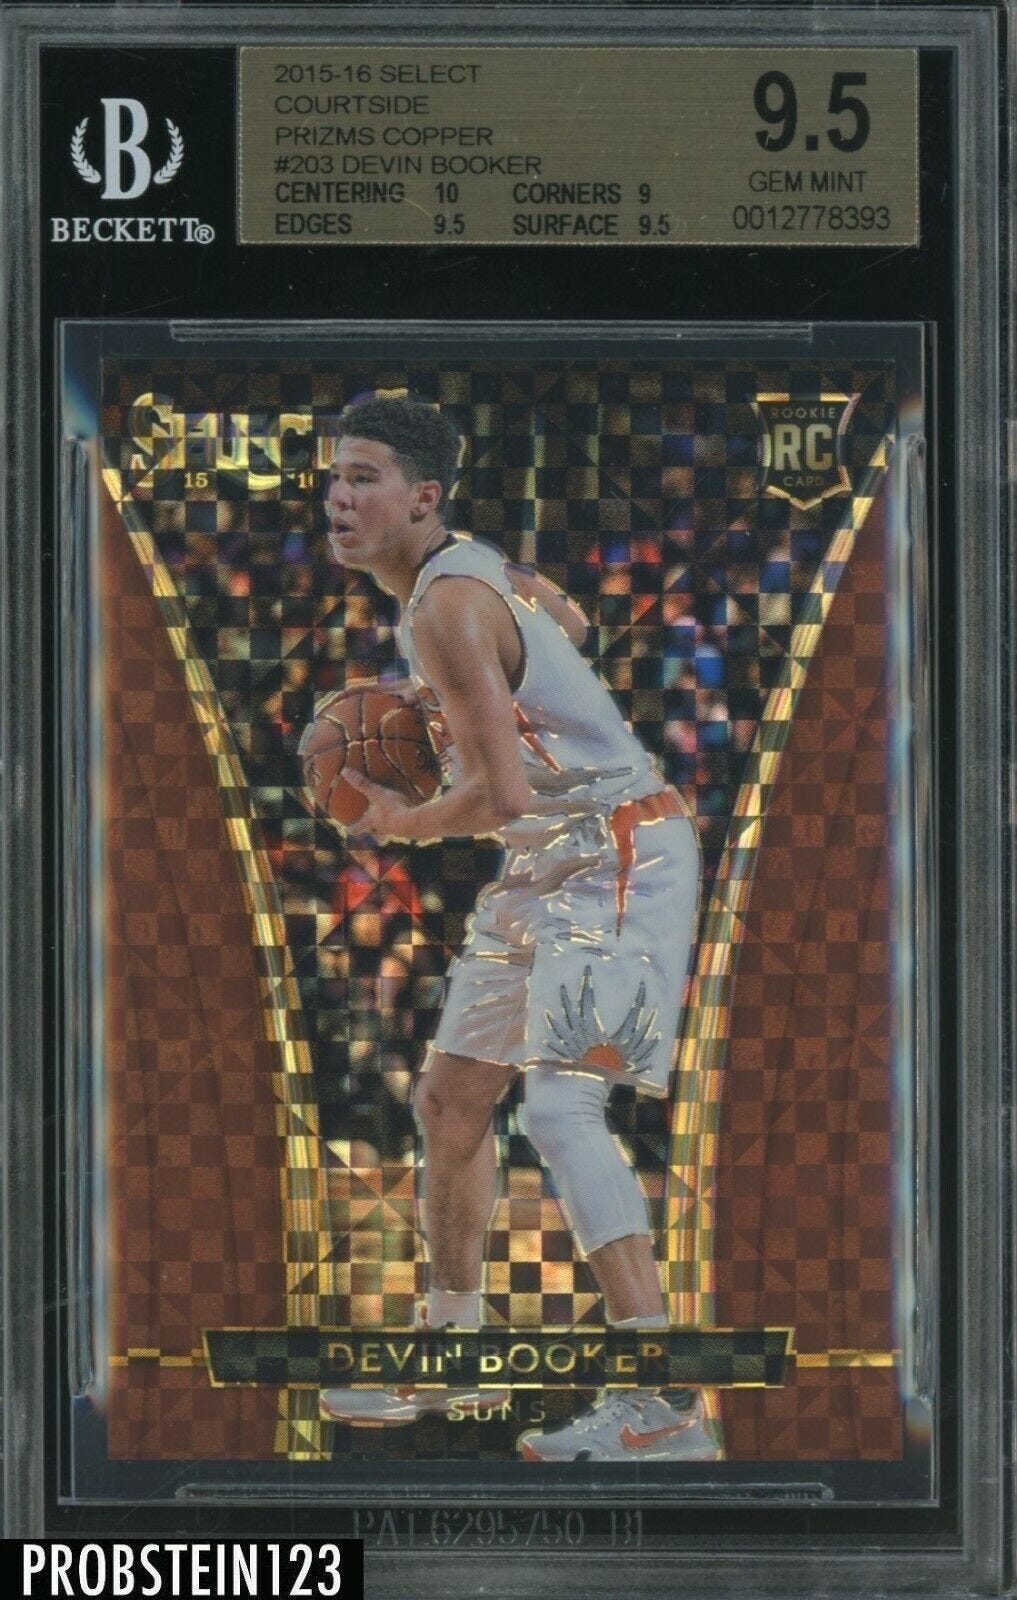 Image 1 - 2015-16-Select-Copper-Prizm-Courtside-203-Devin-Booker-RC-Rookie-17-49-BGS-9-5